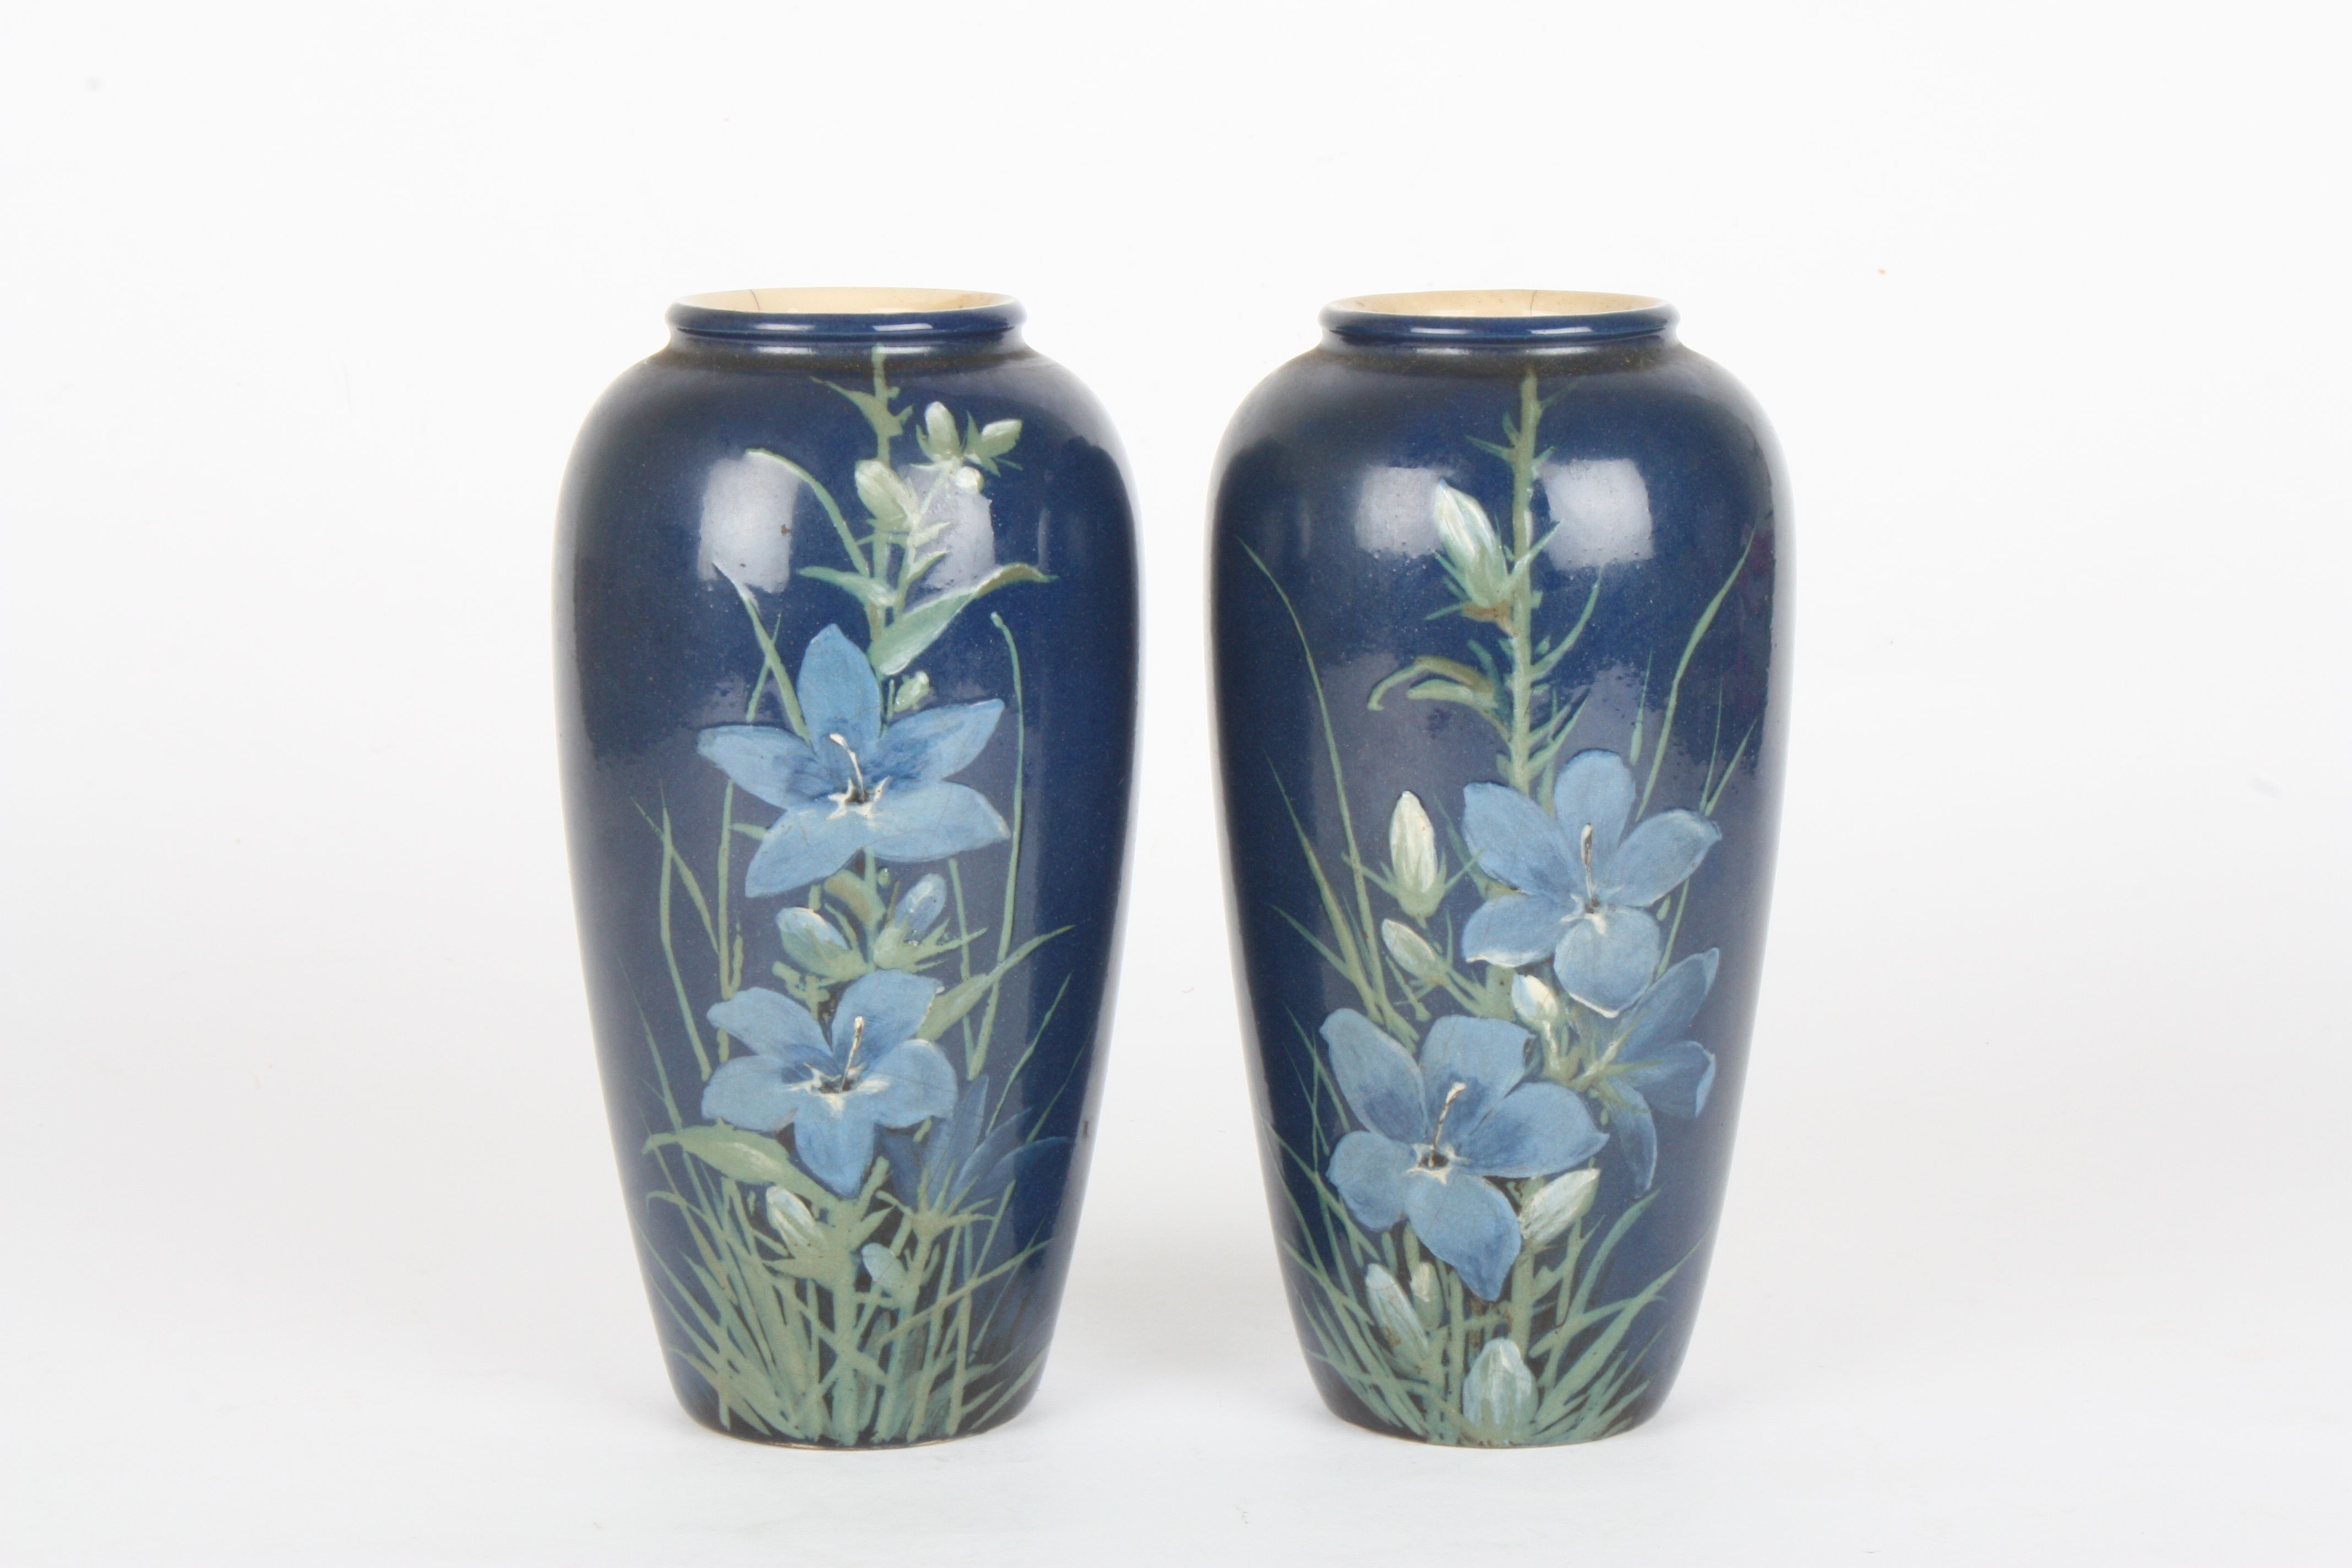 A pair of Royal Doulton Faience vases by Florence Barlow
decorated with flowers and leaves on a